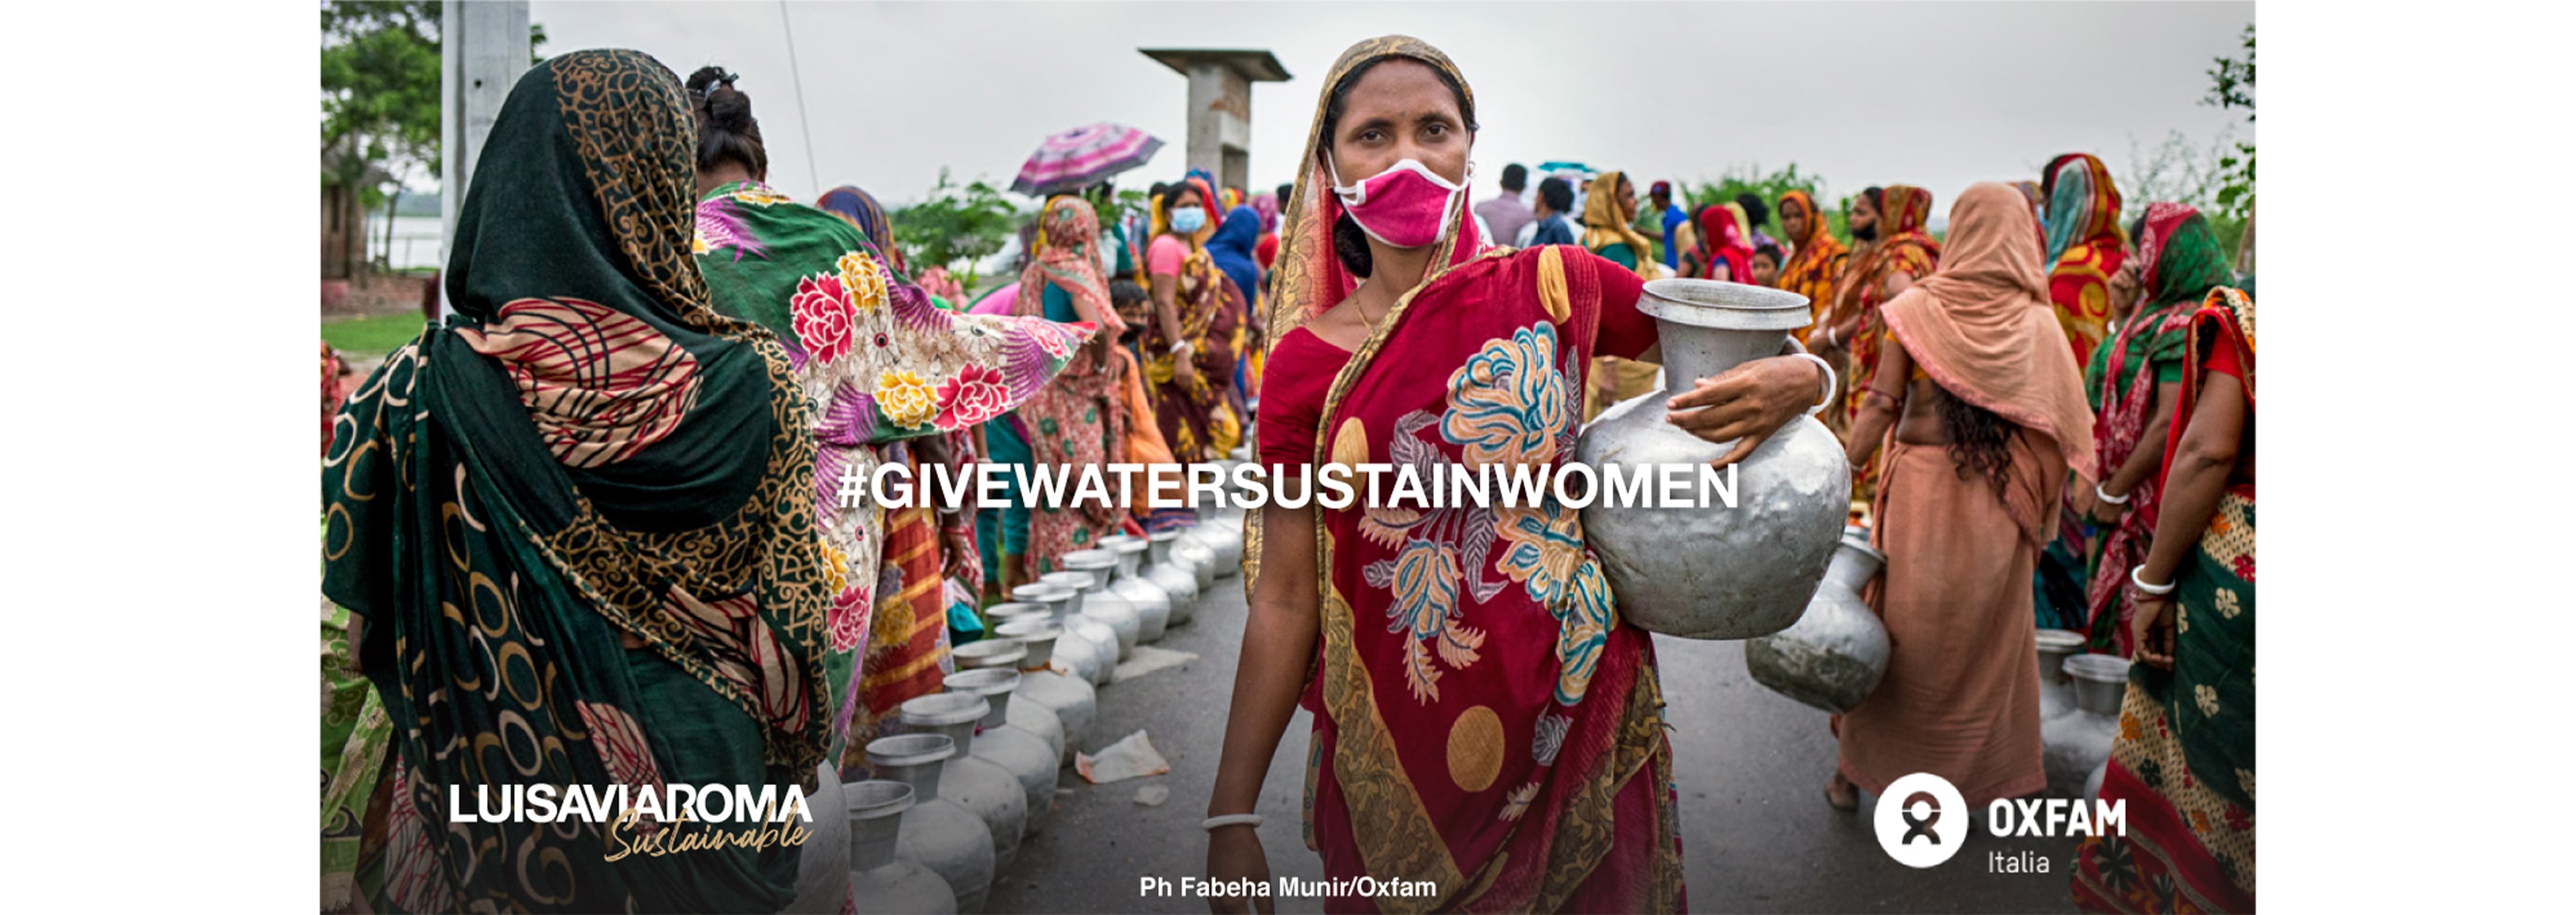 LVRSustainable & Oxfam Italie pour Give Water, Sustain Women : Dorothy raconte